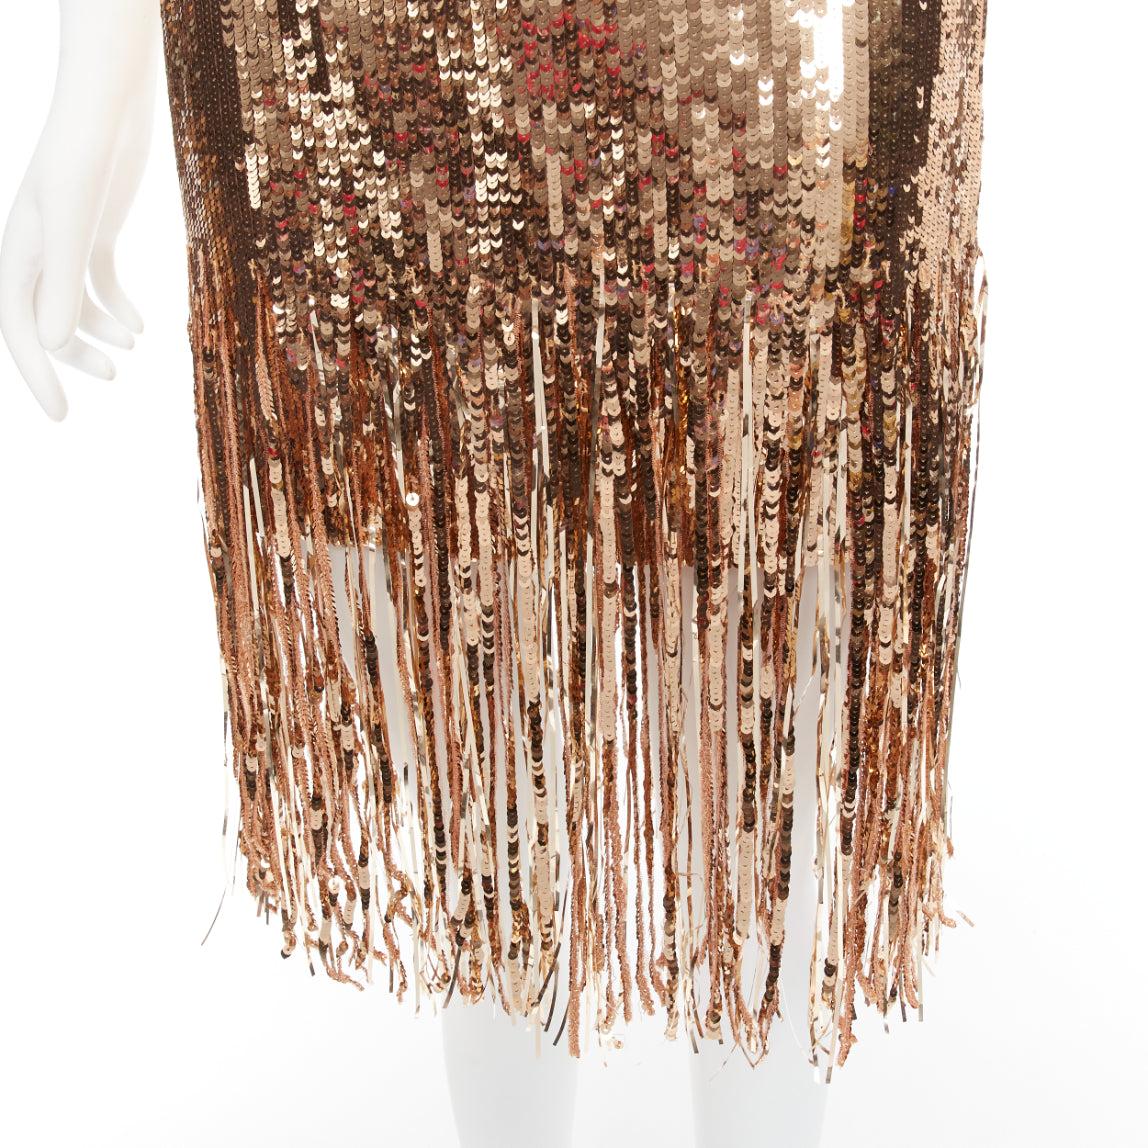 MSGM metallic gold sequins fringe hem flapped skirt IT38 XS
Reference: AAWC/A00580
Brand: MSGM
Material: Polyester
Color: Gold
Pattern: Solid
Closure: Zip
Lining: Black Polyester
Extra Details: Fringe hem. Side closure. Fully lined.
Made in: